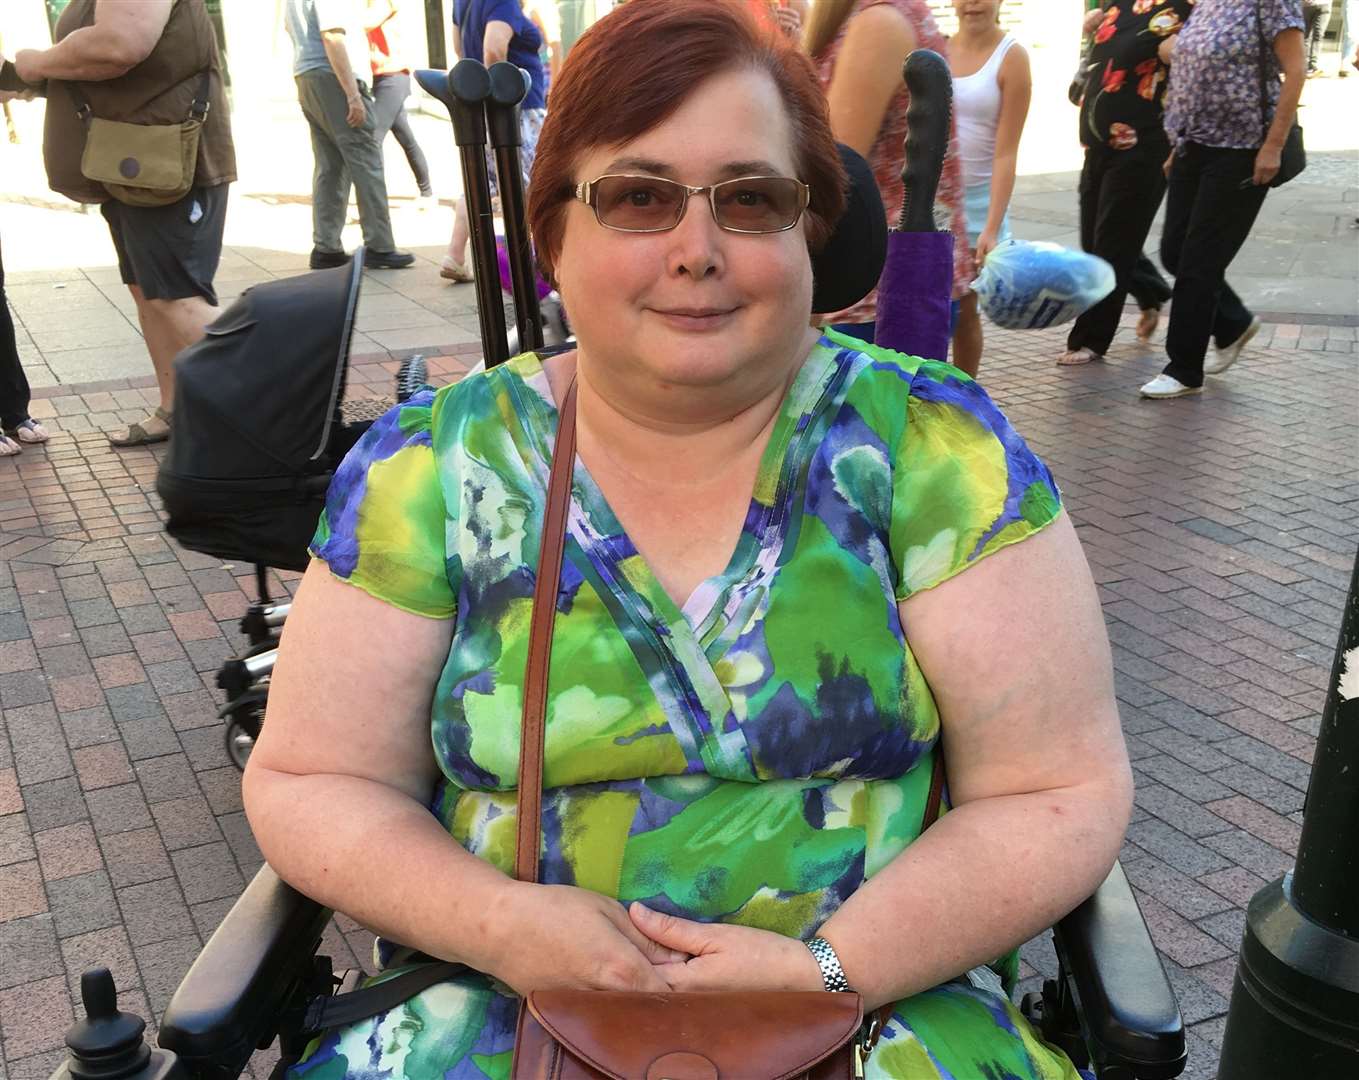 Disability campaigner Sue Groves